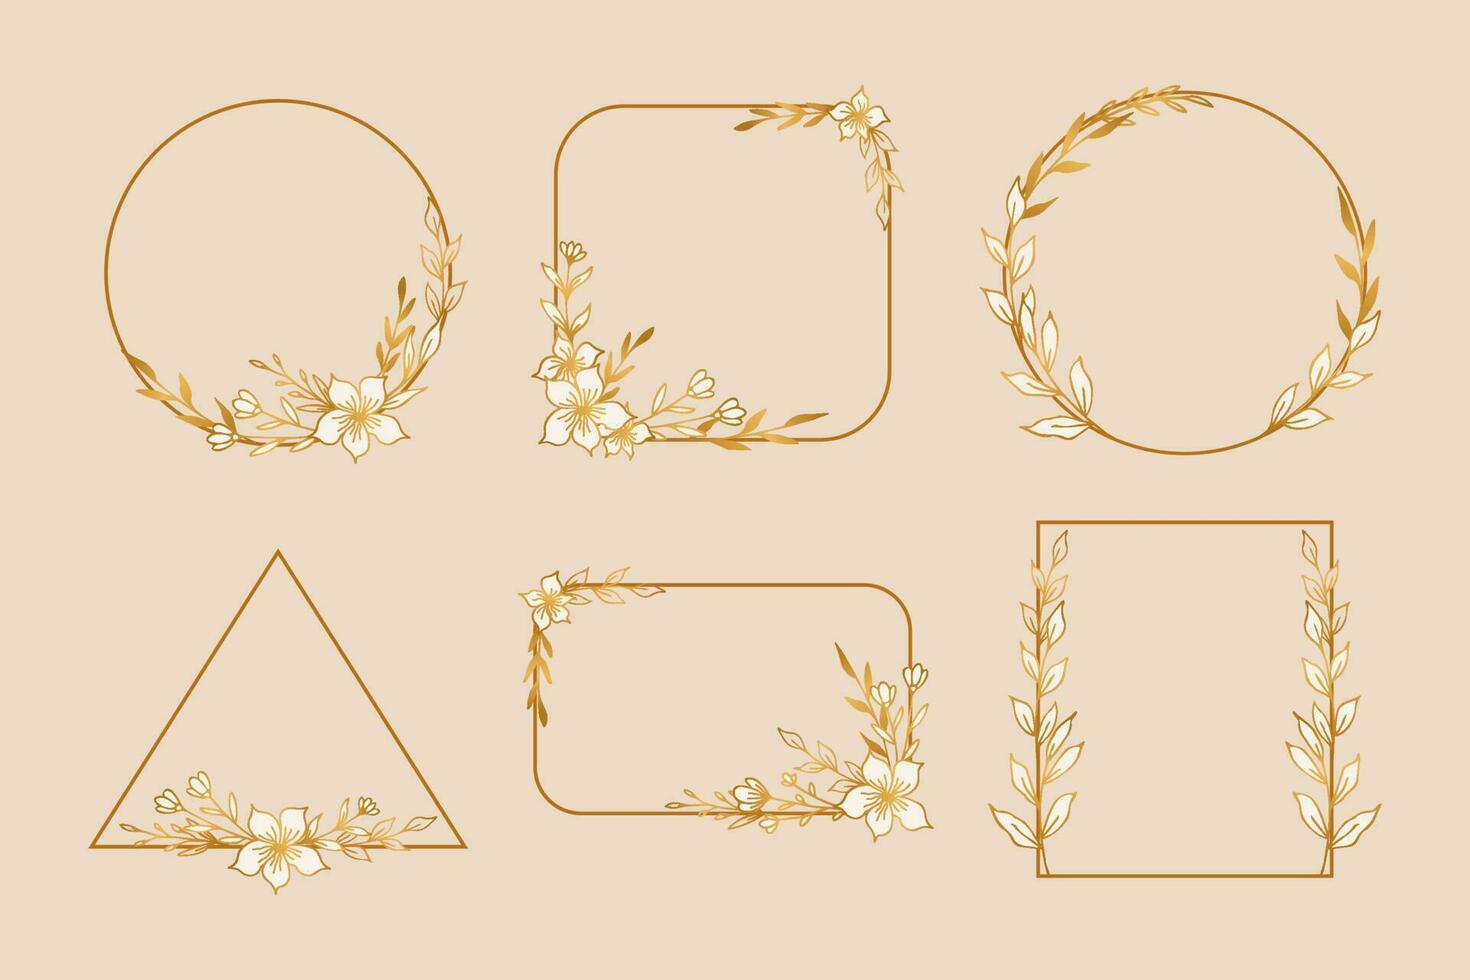 A set of Elegant gold floral borders for wedding or engagement invitations, thank you cards, logos, greeting card vector